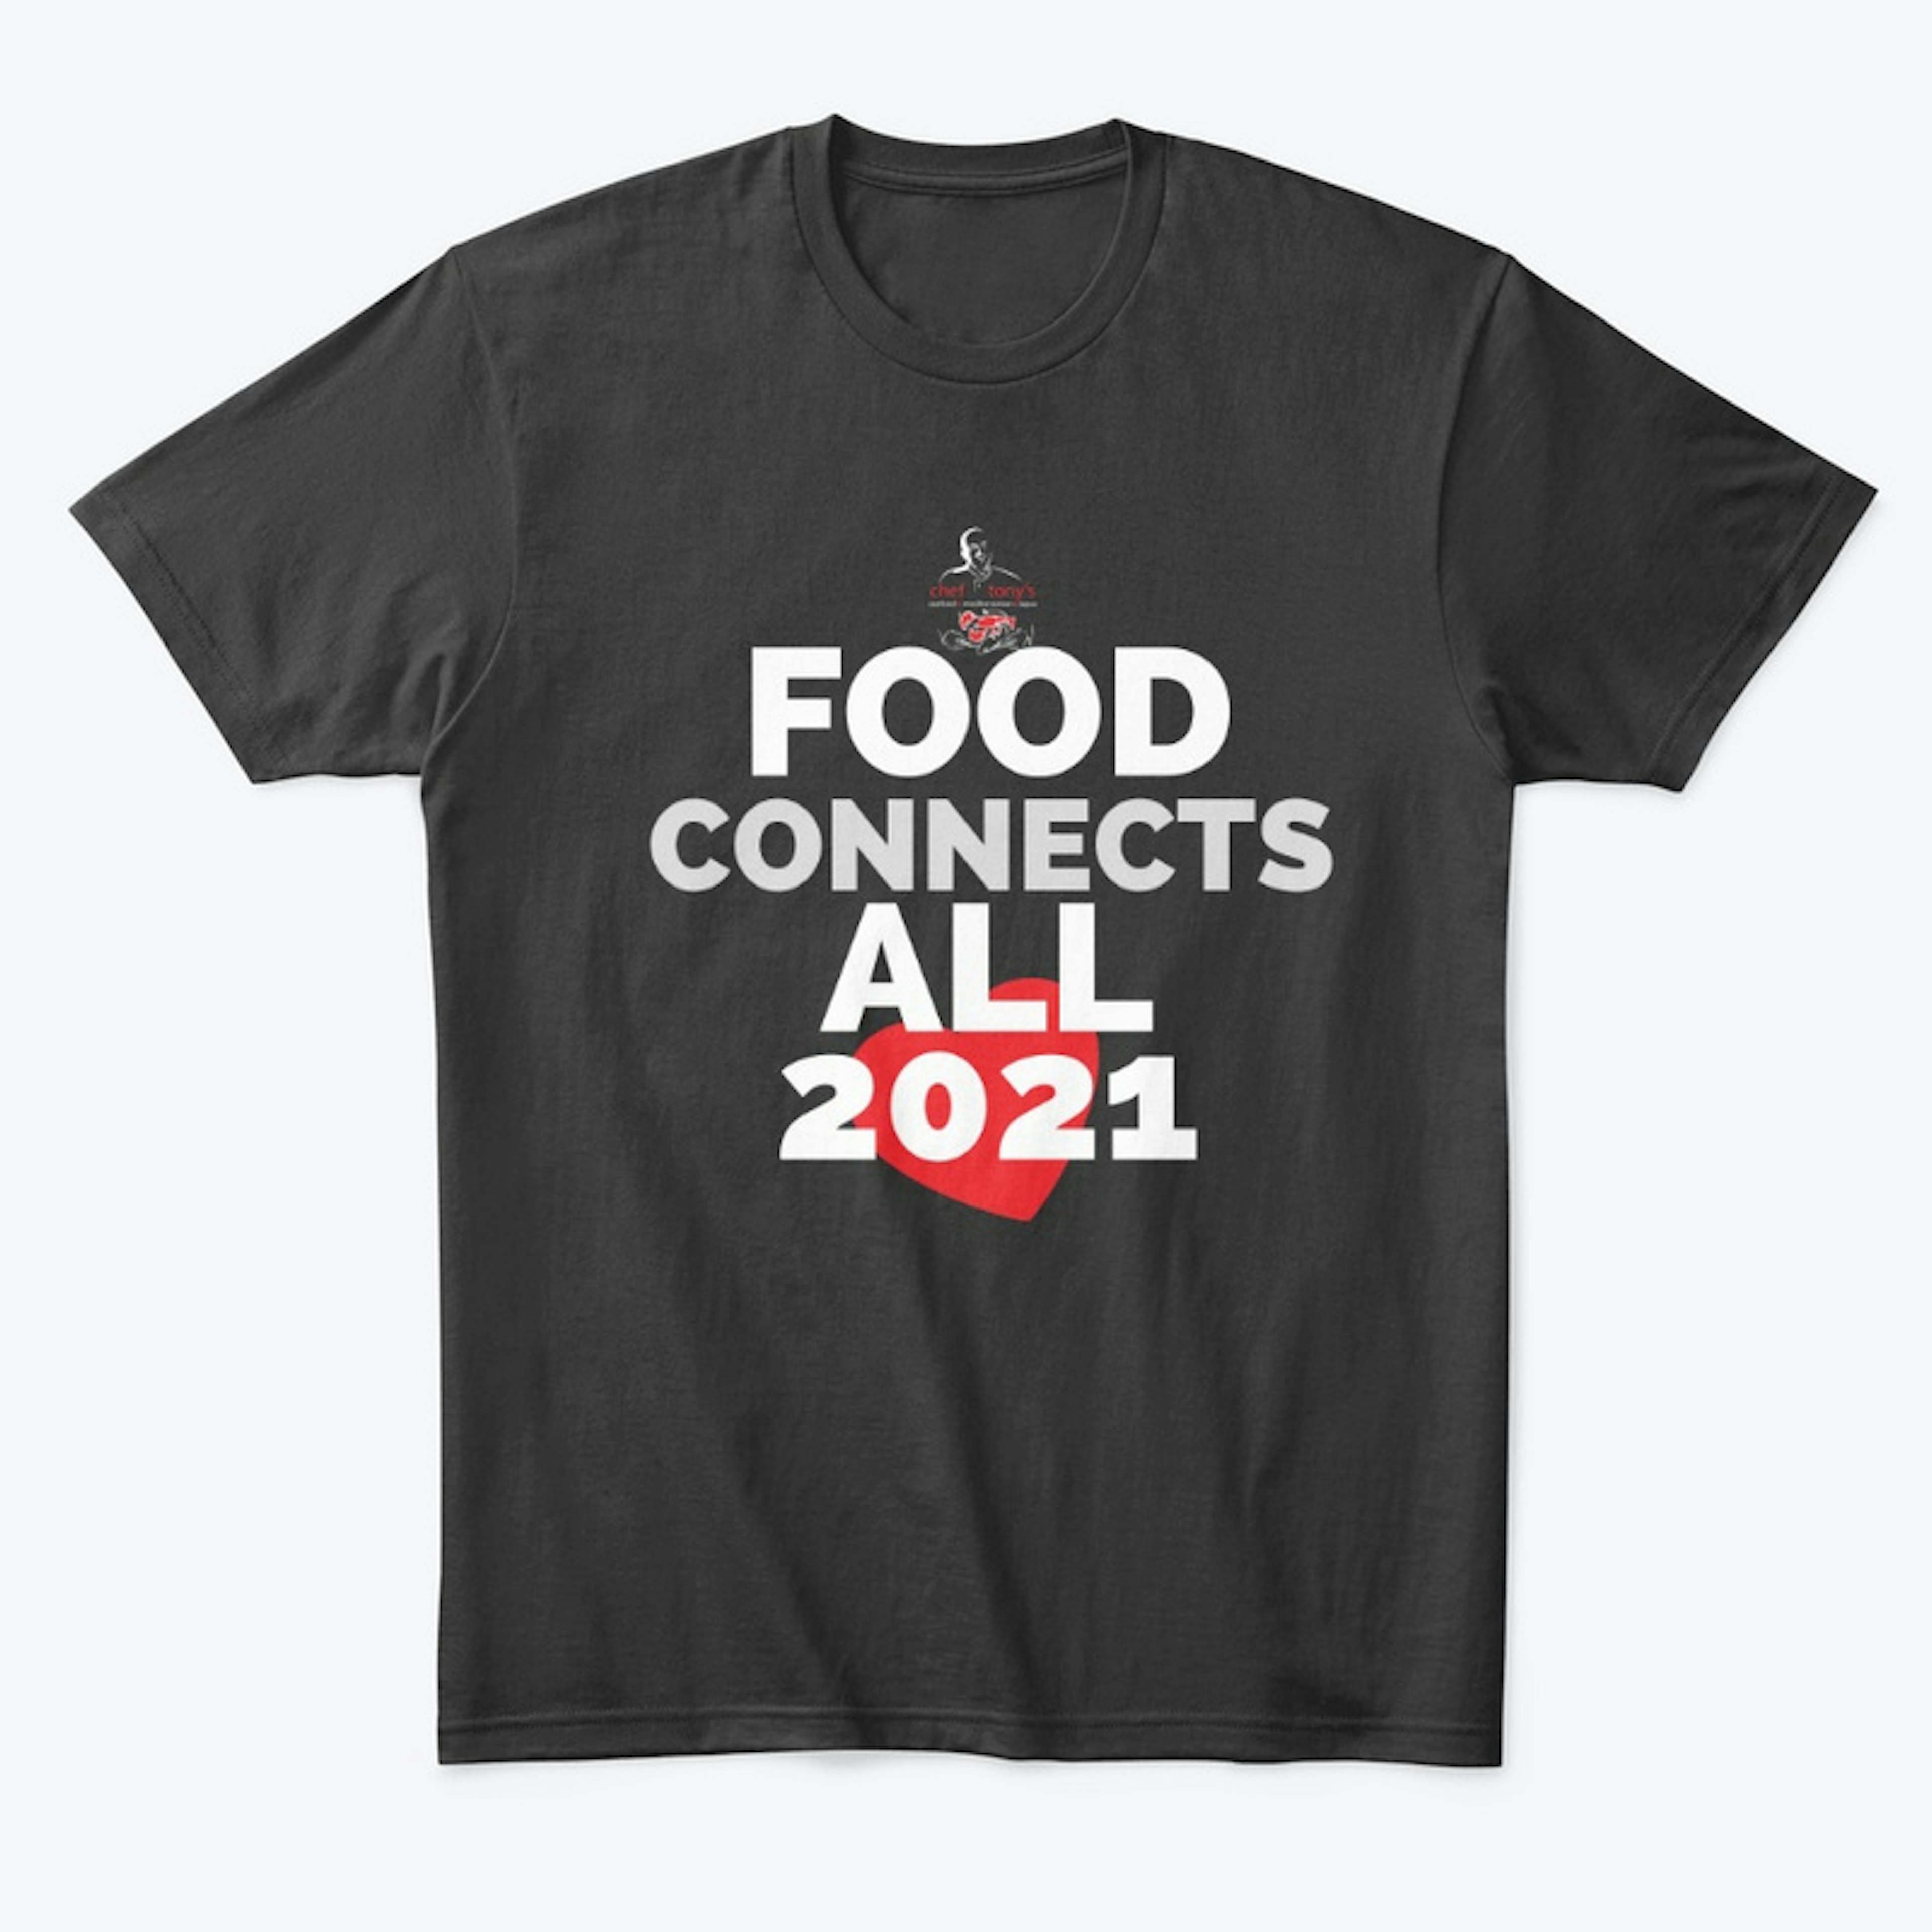 2021 Food Connects All!